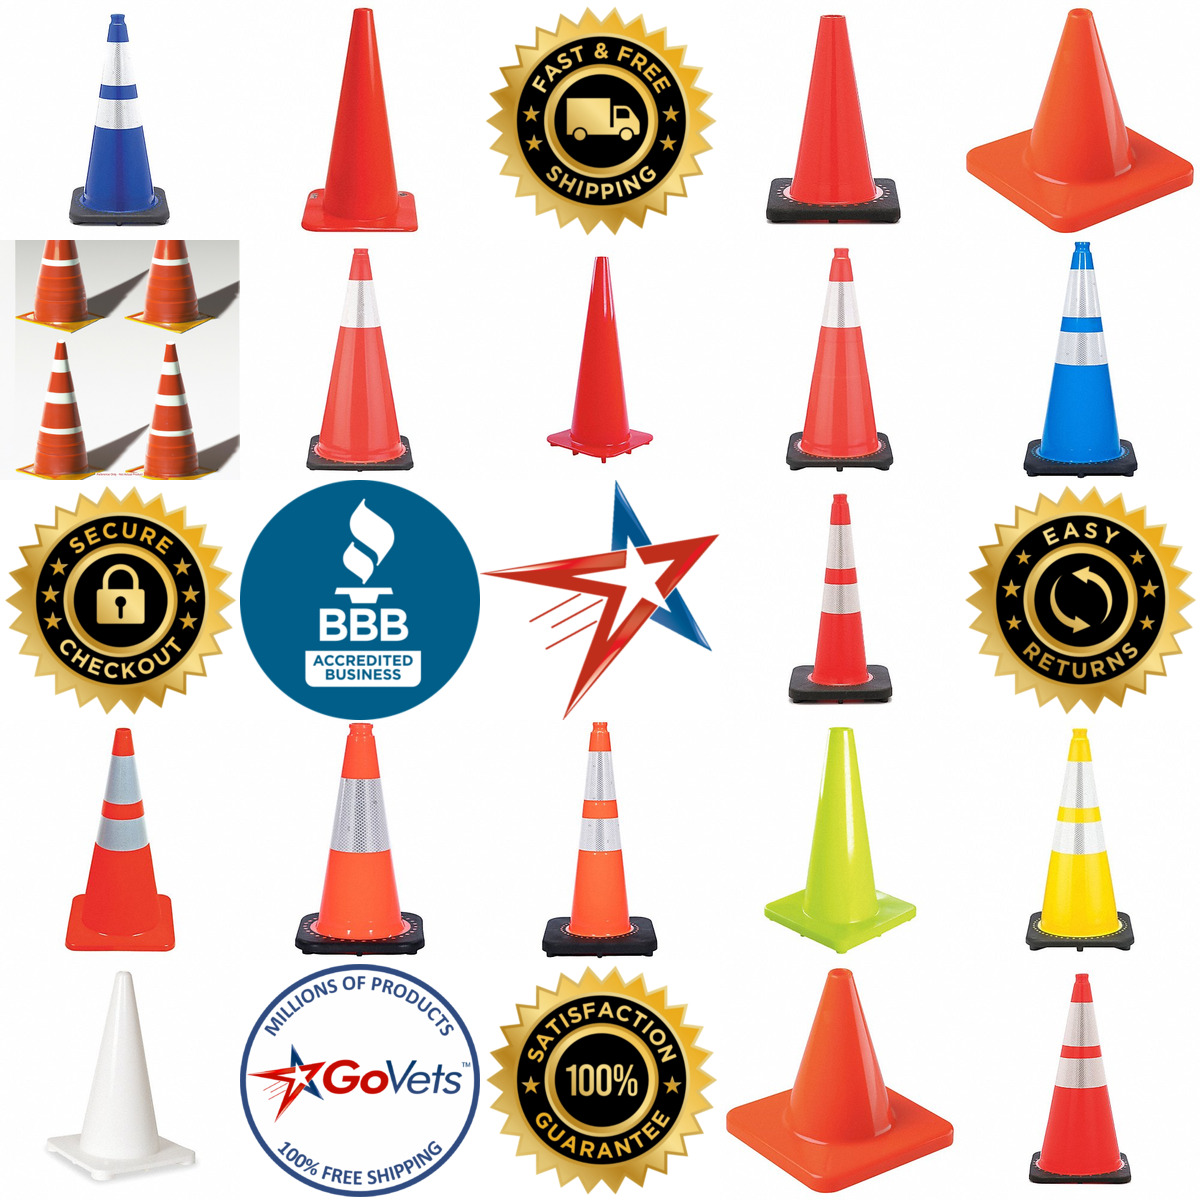 A selection of Traffic Cones products on GoVets